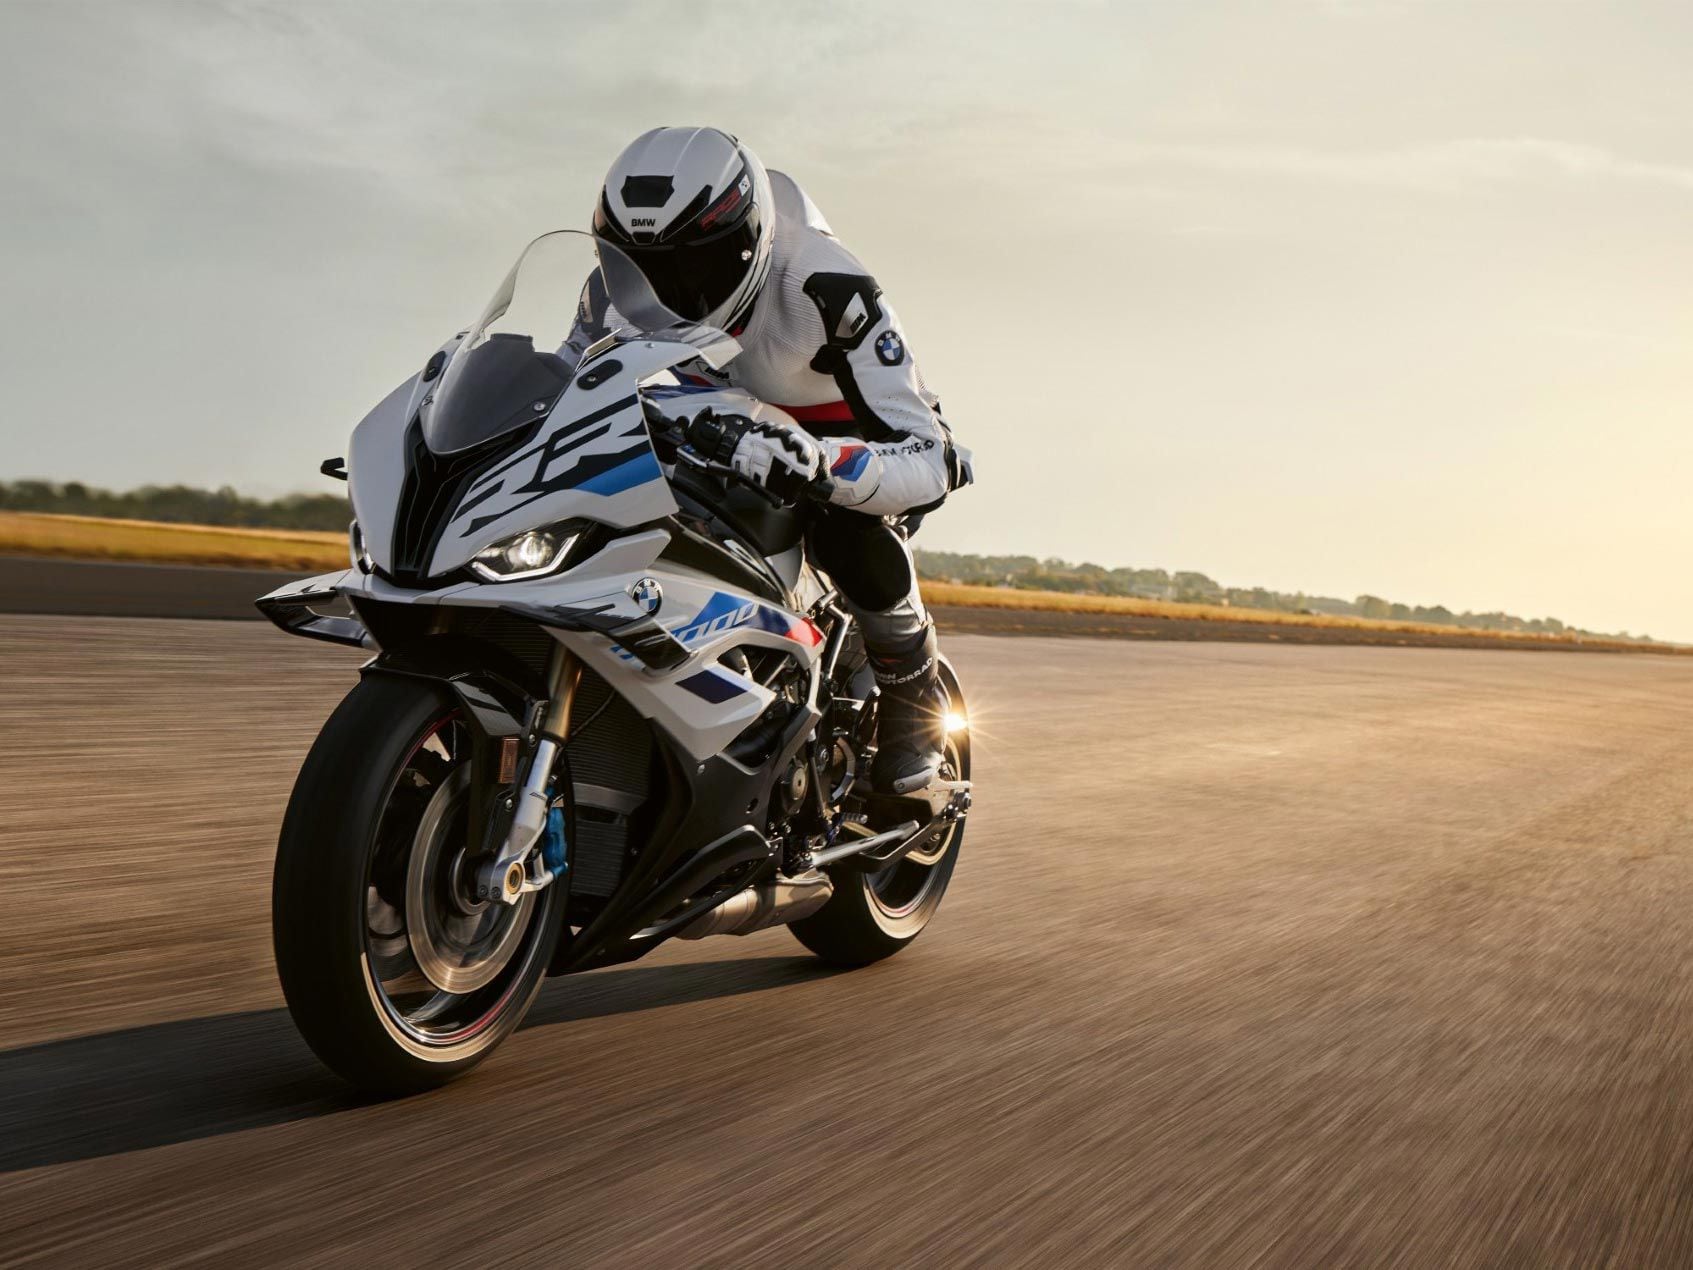 BMW’s 2023 S 1000 RR is more track focused, with modifications to the chassis, engine, and aerodynamics.